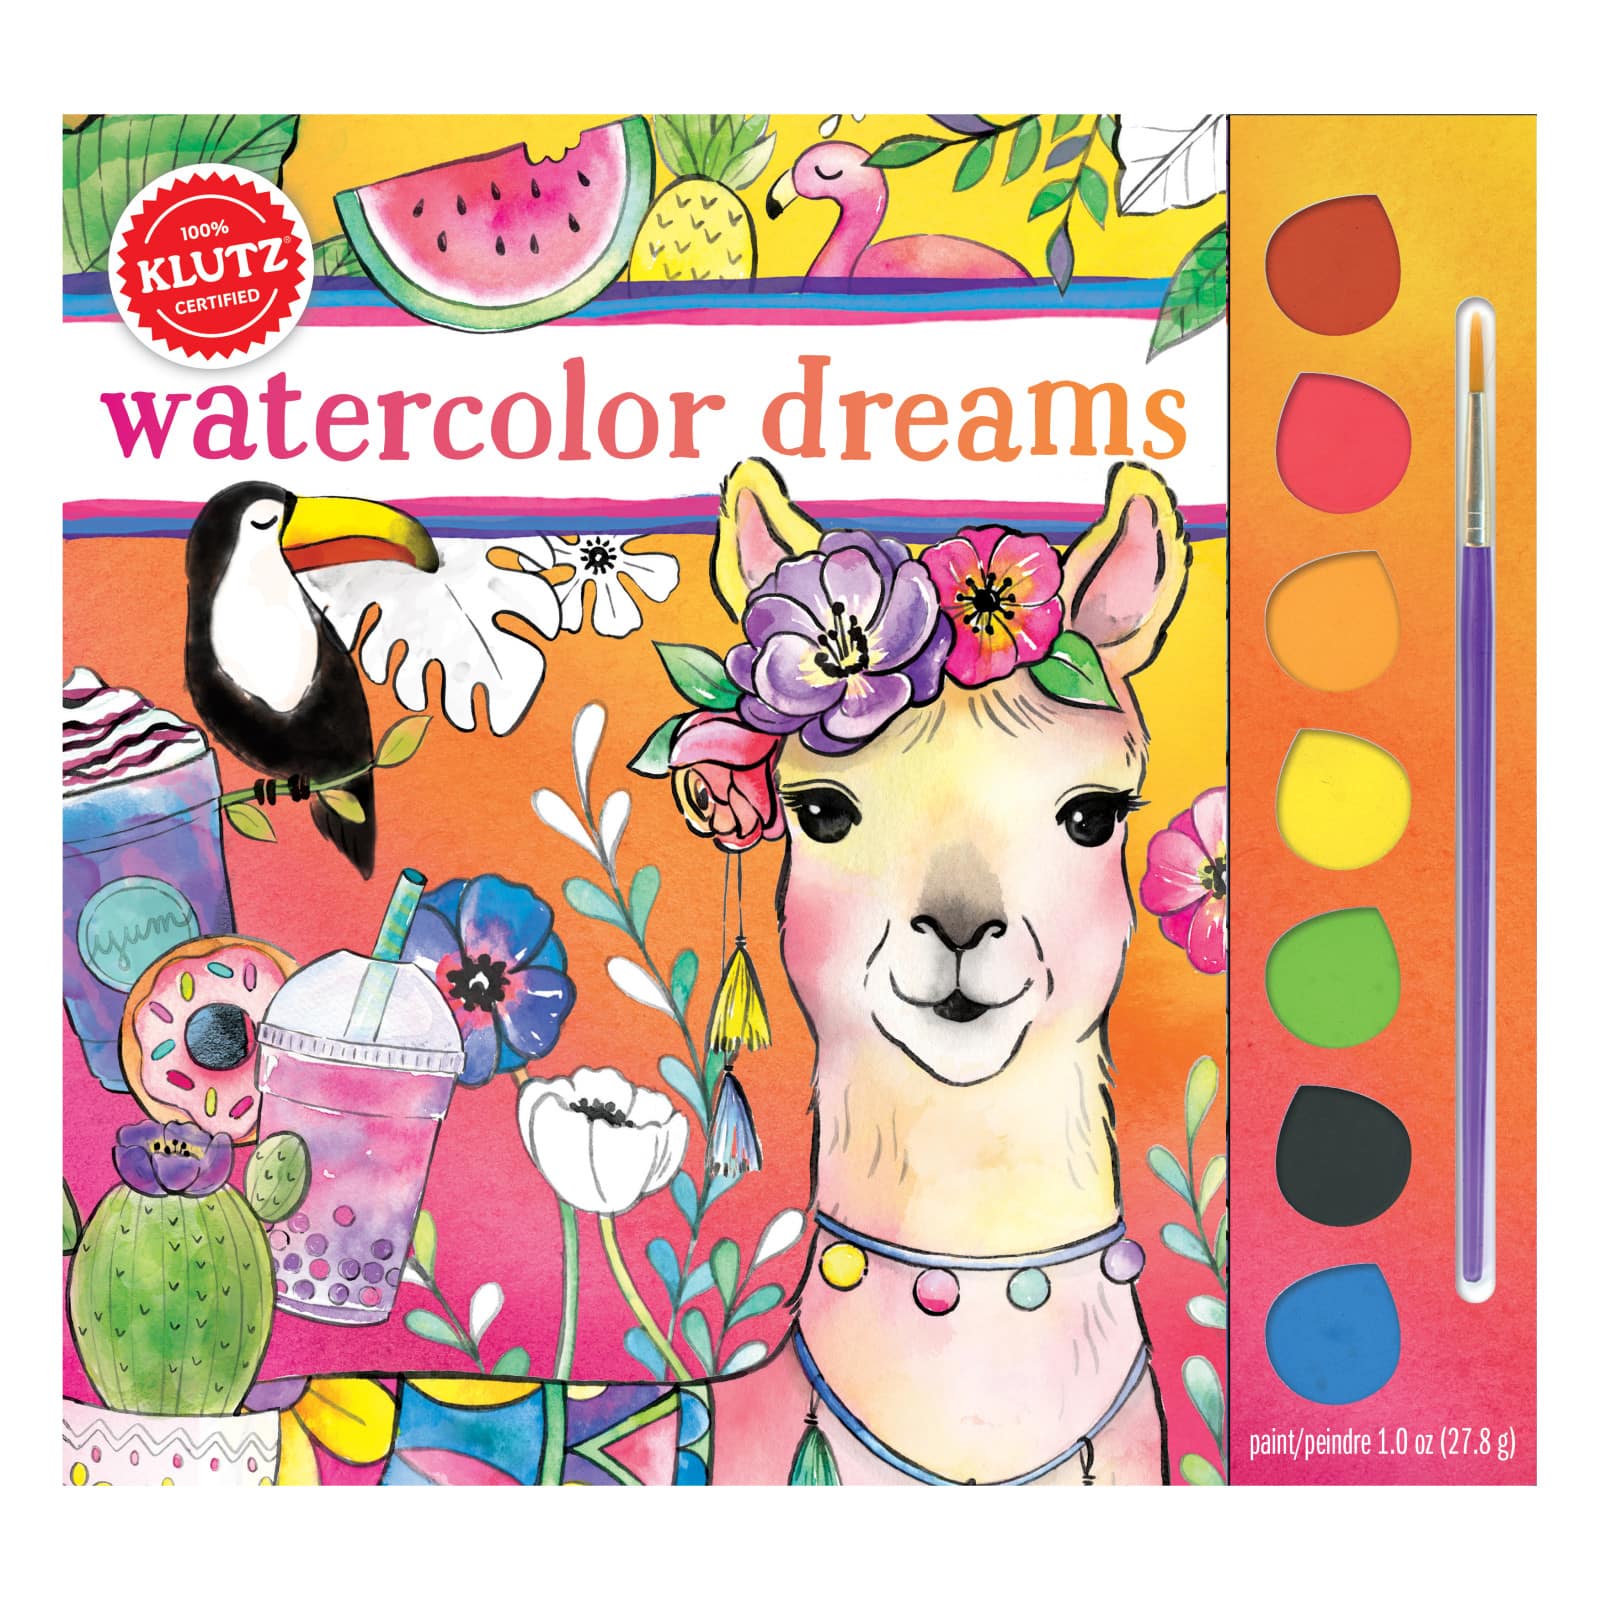 Shop Watercolor Coloring Book For Adults online